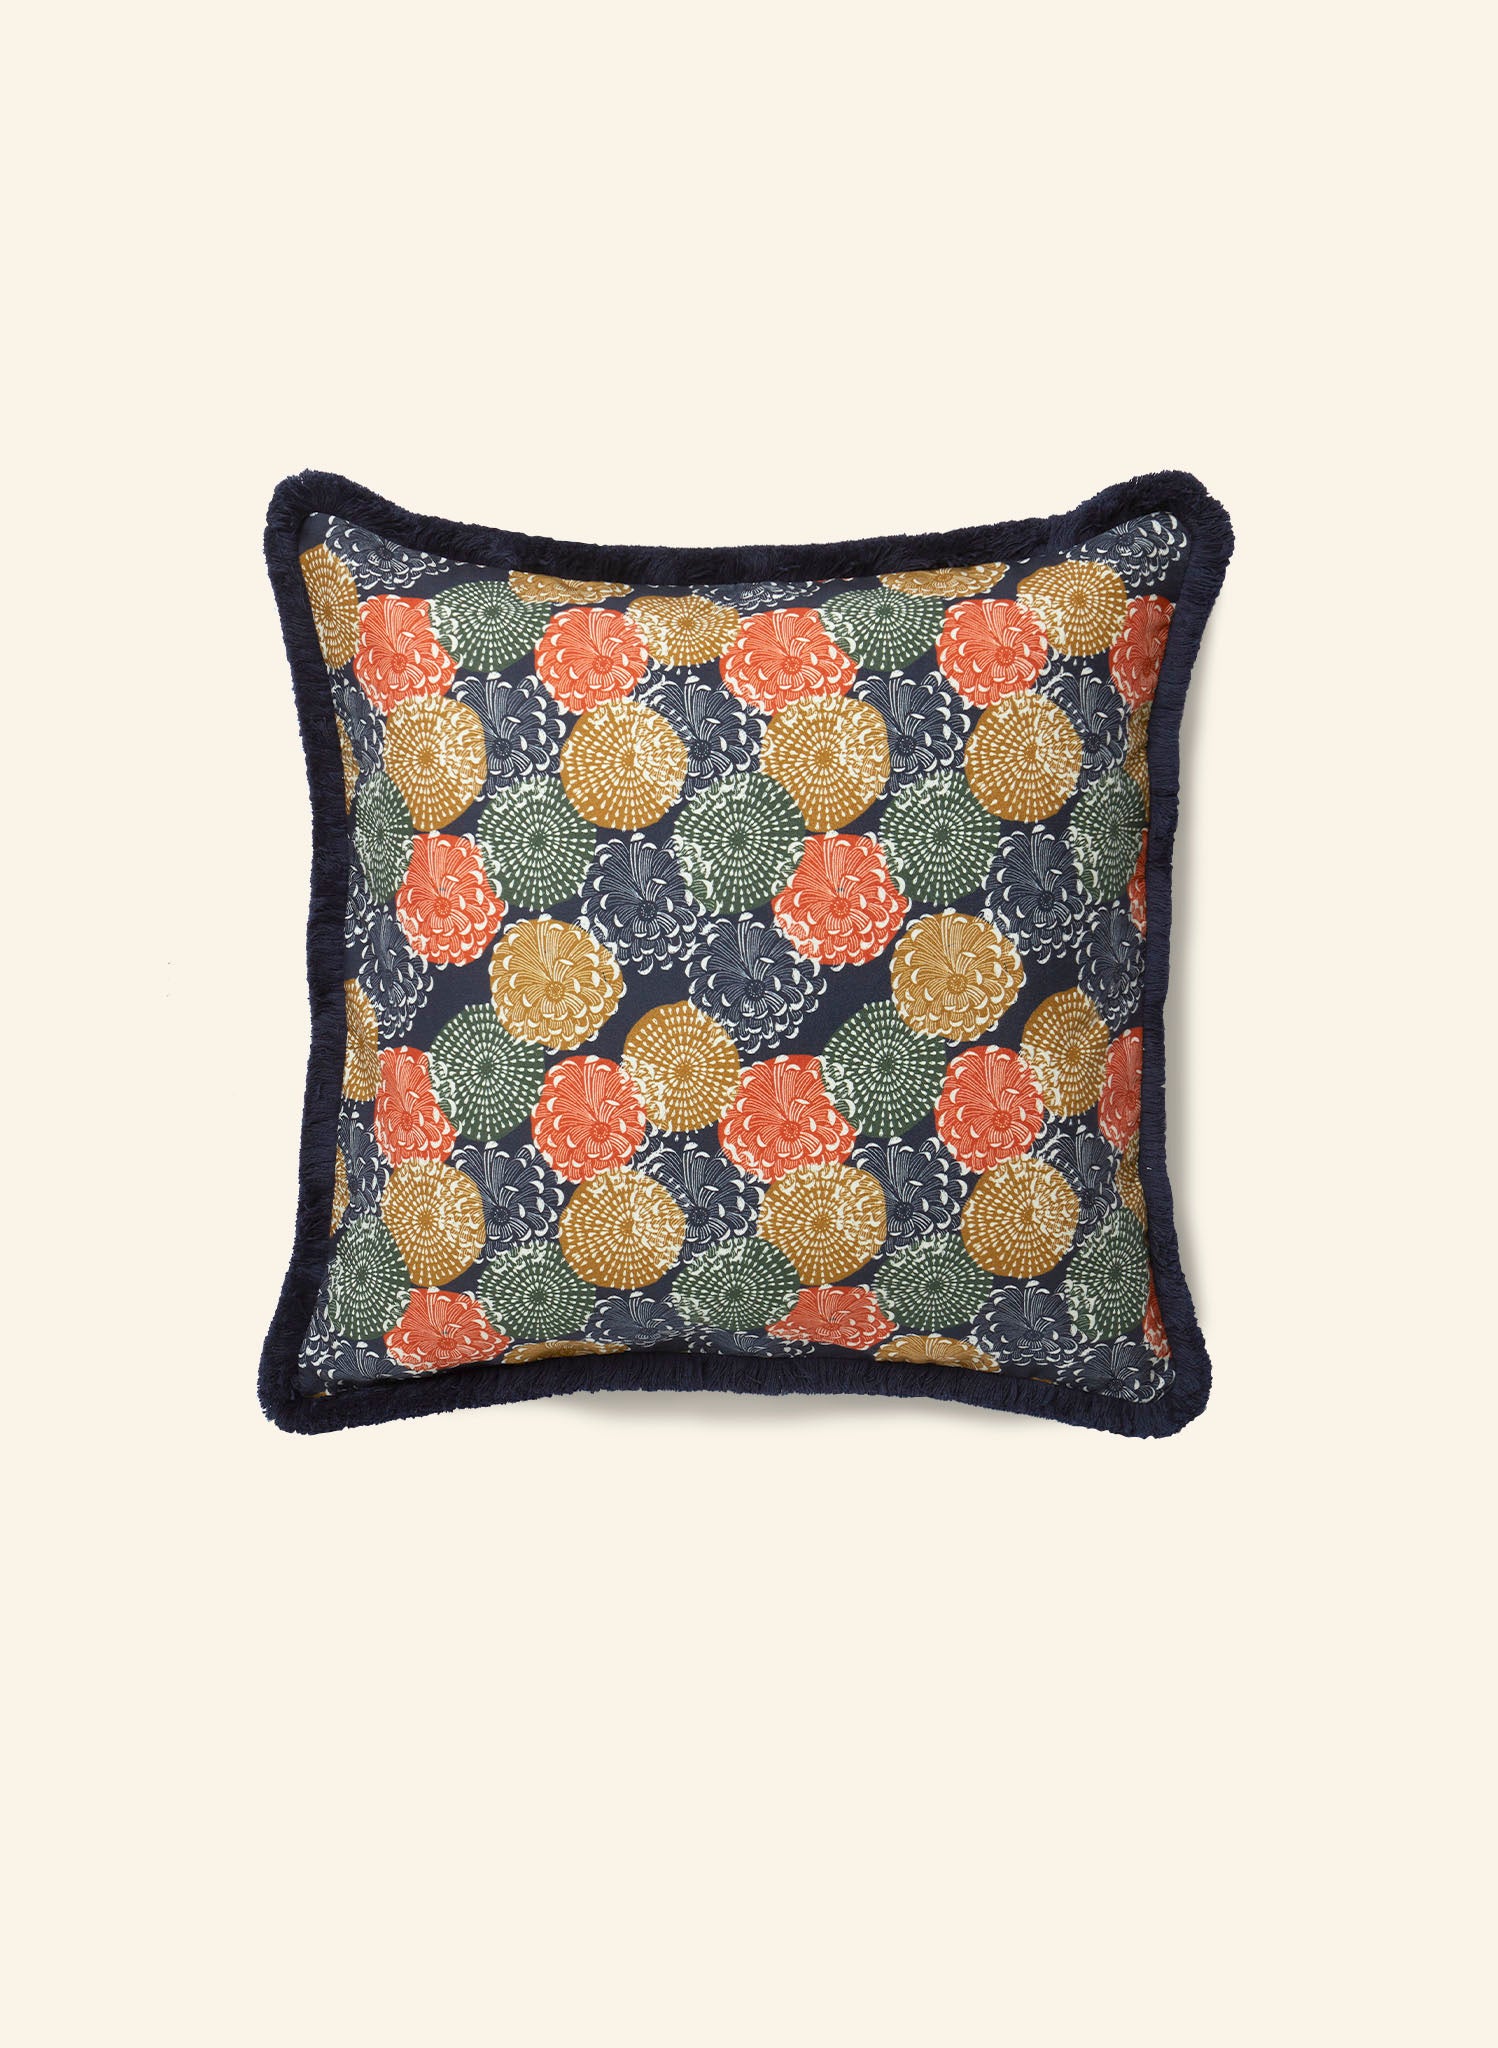 Cushion Cover - Navy Pinecones